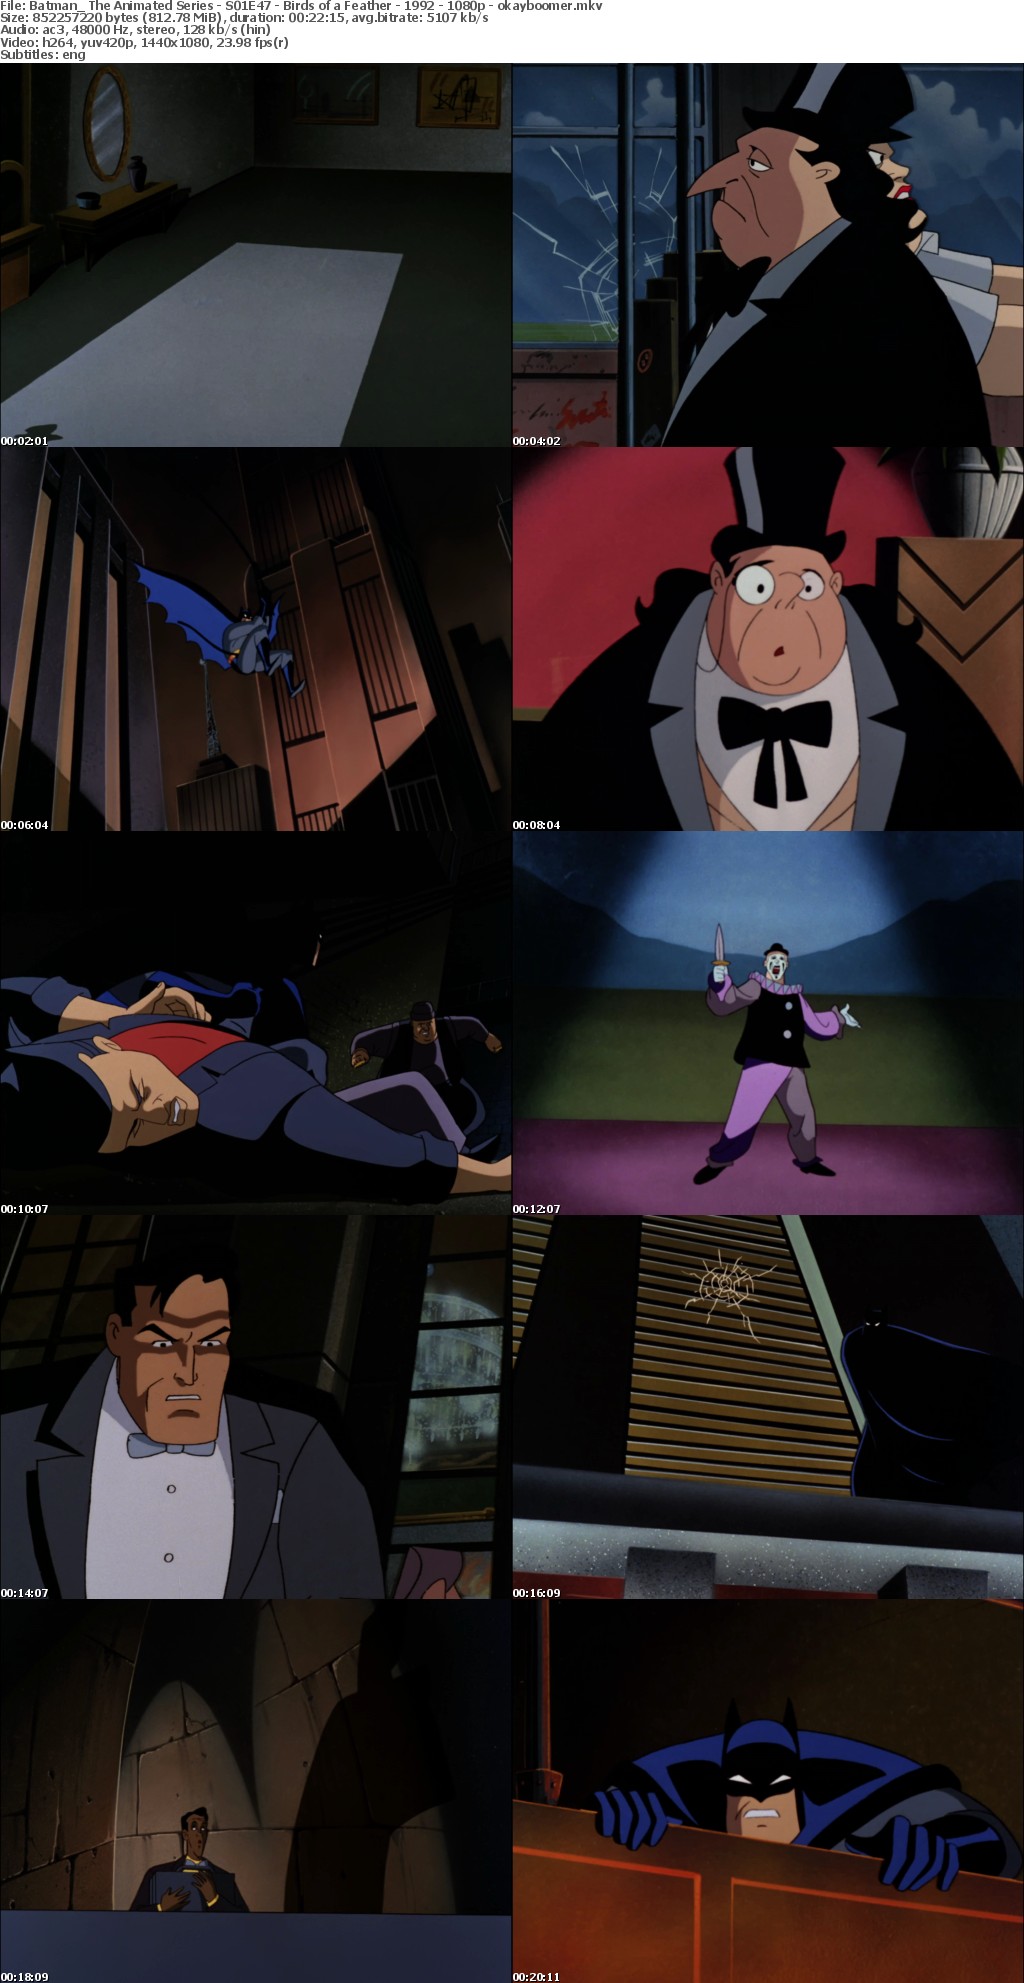 Batman The Animated Series - S01E47 - Birds of a Feather - 1992 - 1080p - okayboomer mkv